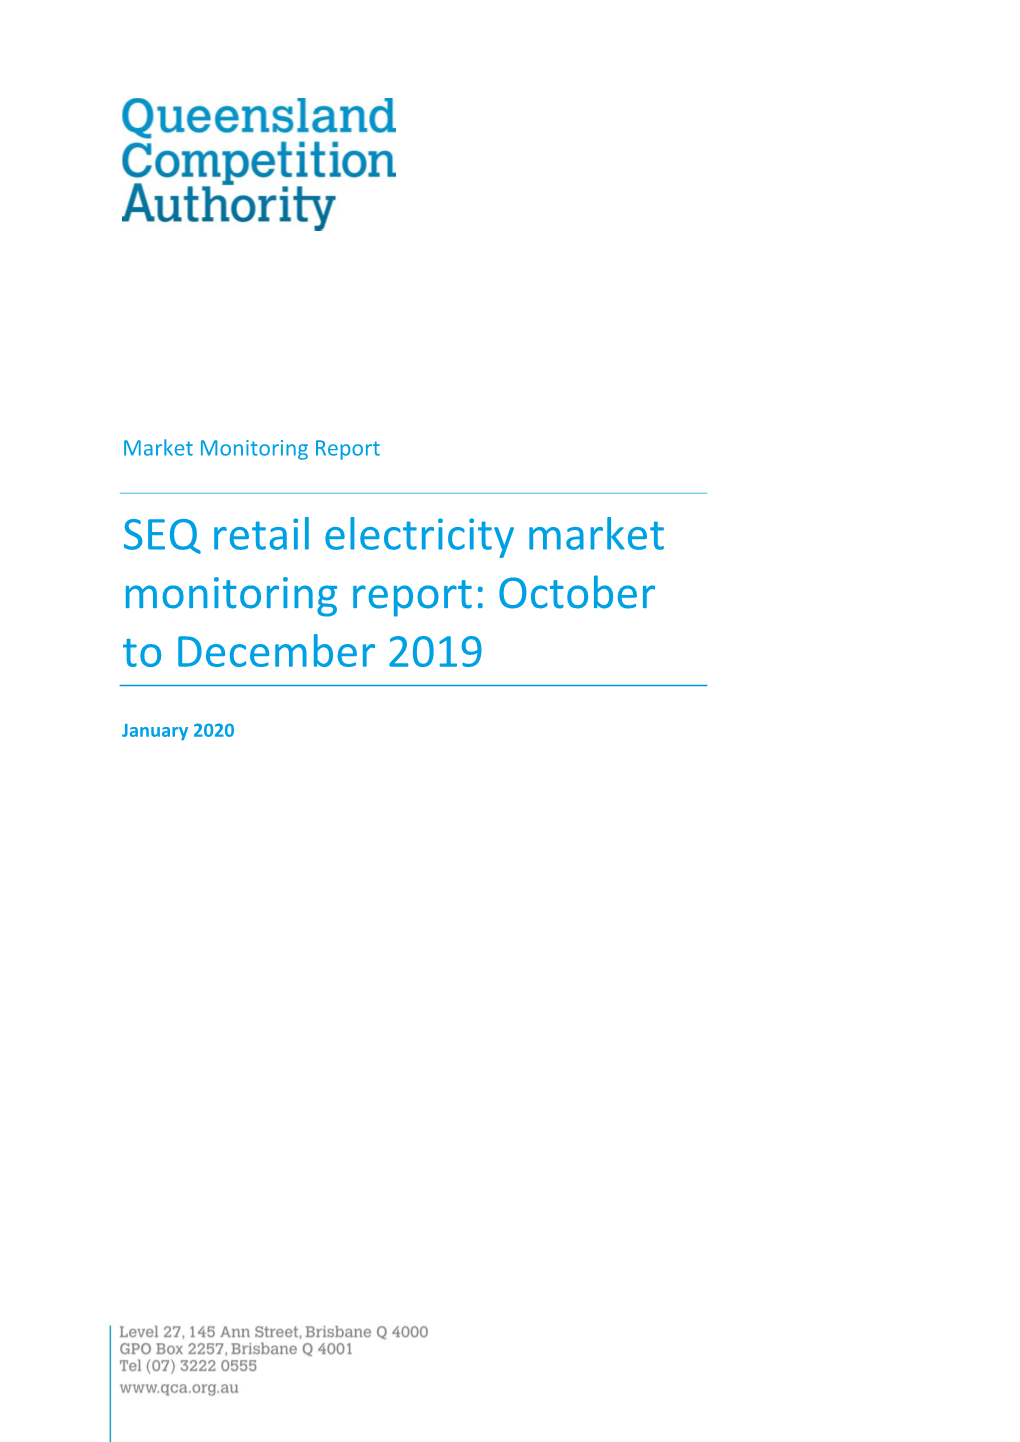 SEQ Retail Electricity Market Monitoring Report: October to December 2019